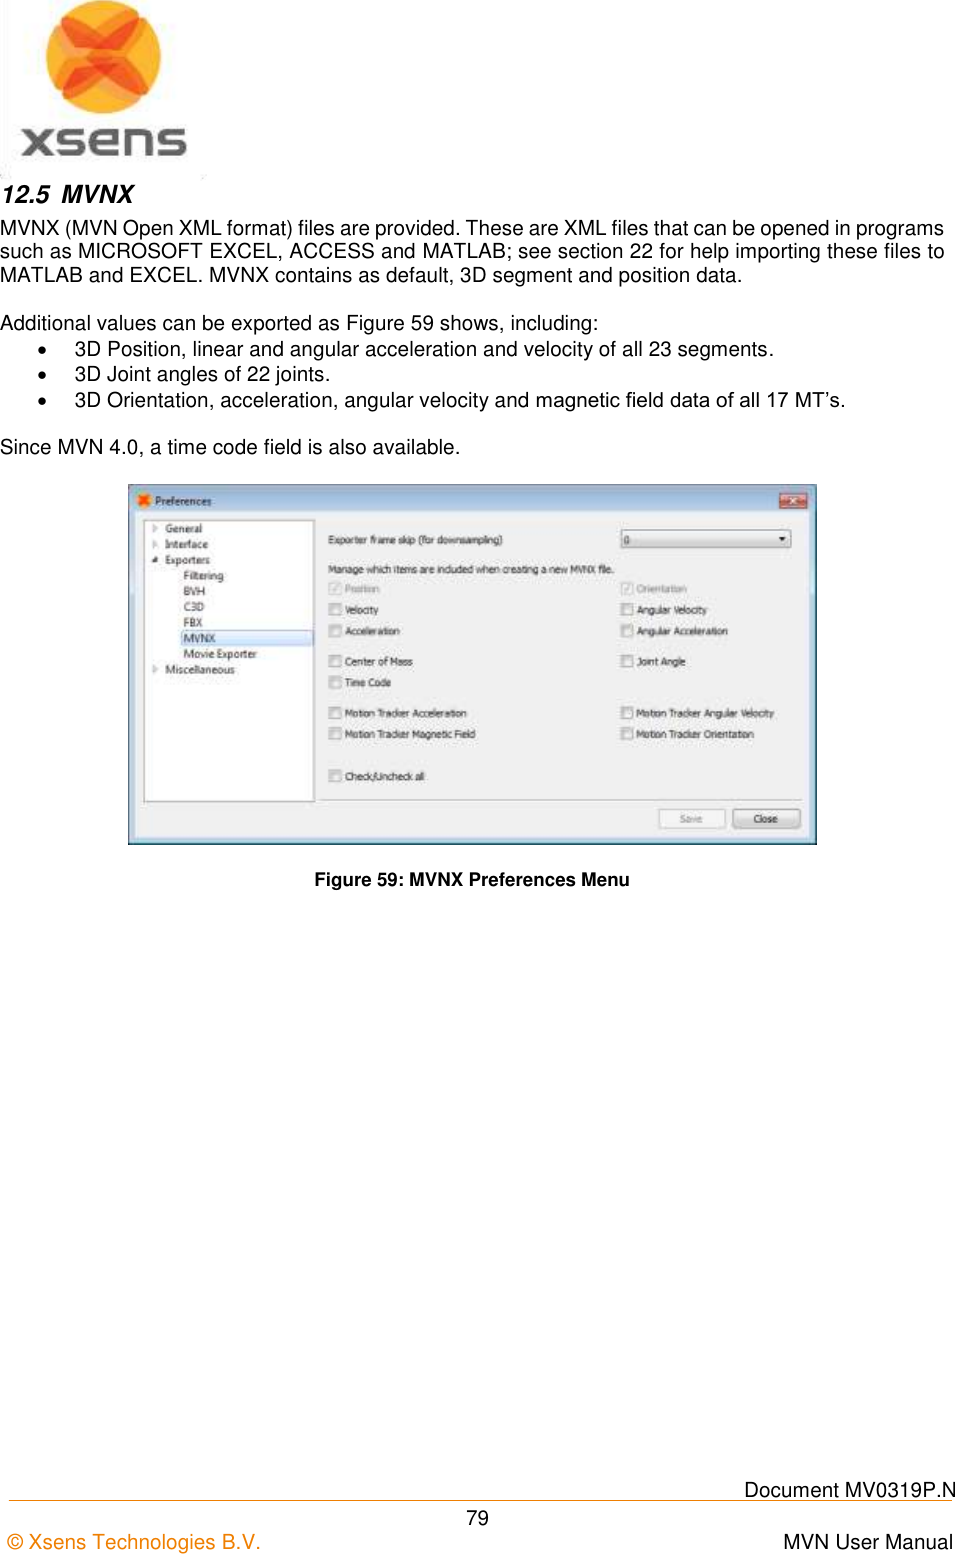    Document MV0319P.N © Xsens Technologies B.V.      MVN User Manual  79 12.5  MVNX MVNX (MVN Open XML format) files are provided. These are XML files that can be opened in programs such as MICROSOFT EXCEL, ACCESS and MATLAB; see section 22 for help importing these files to MATLAB and EXCEL. MVNX contains as default, 3D segment and position data.   Additional values can be exported as Figure 59 shows, including:   3D Position, linear and angular acceleration and velocity of all 23 segments.   3D Joint angles of 22 joints.   3D Orientation, acceleration, angular velocity and magnetic field data of all 17 MT’s.  Since MVN 4.0, a time code field is also available.  Figure 59: MVNX Preferences Menu 